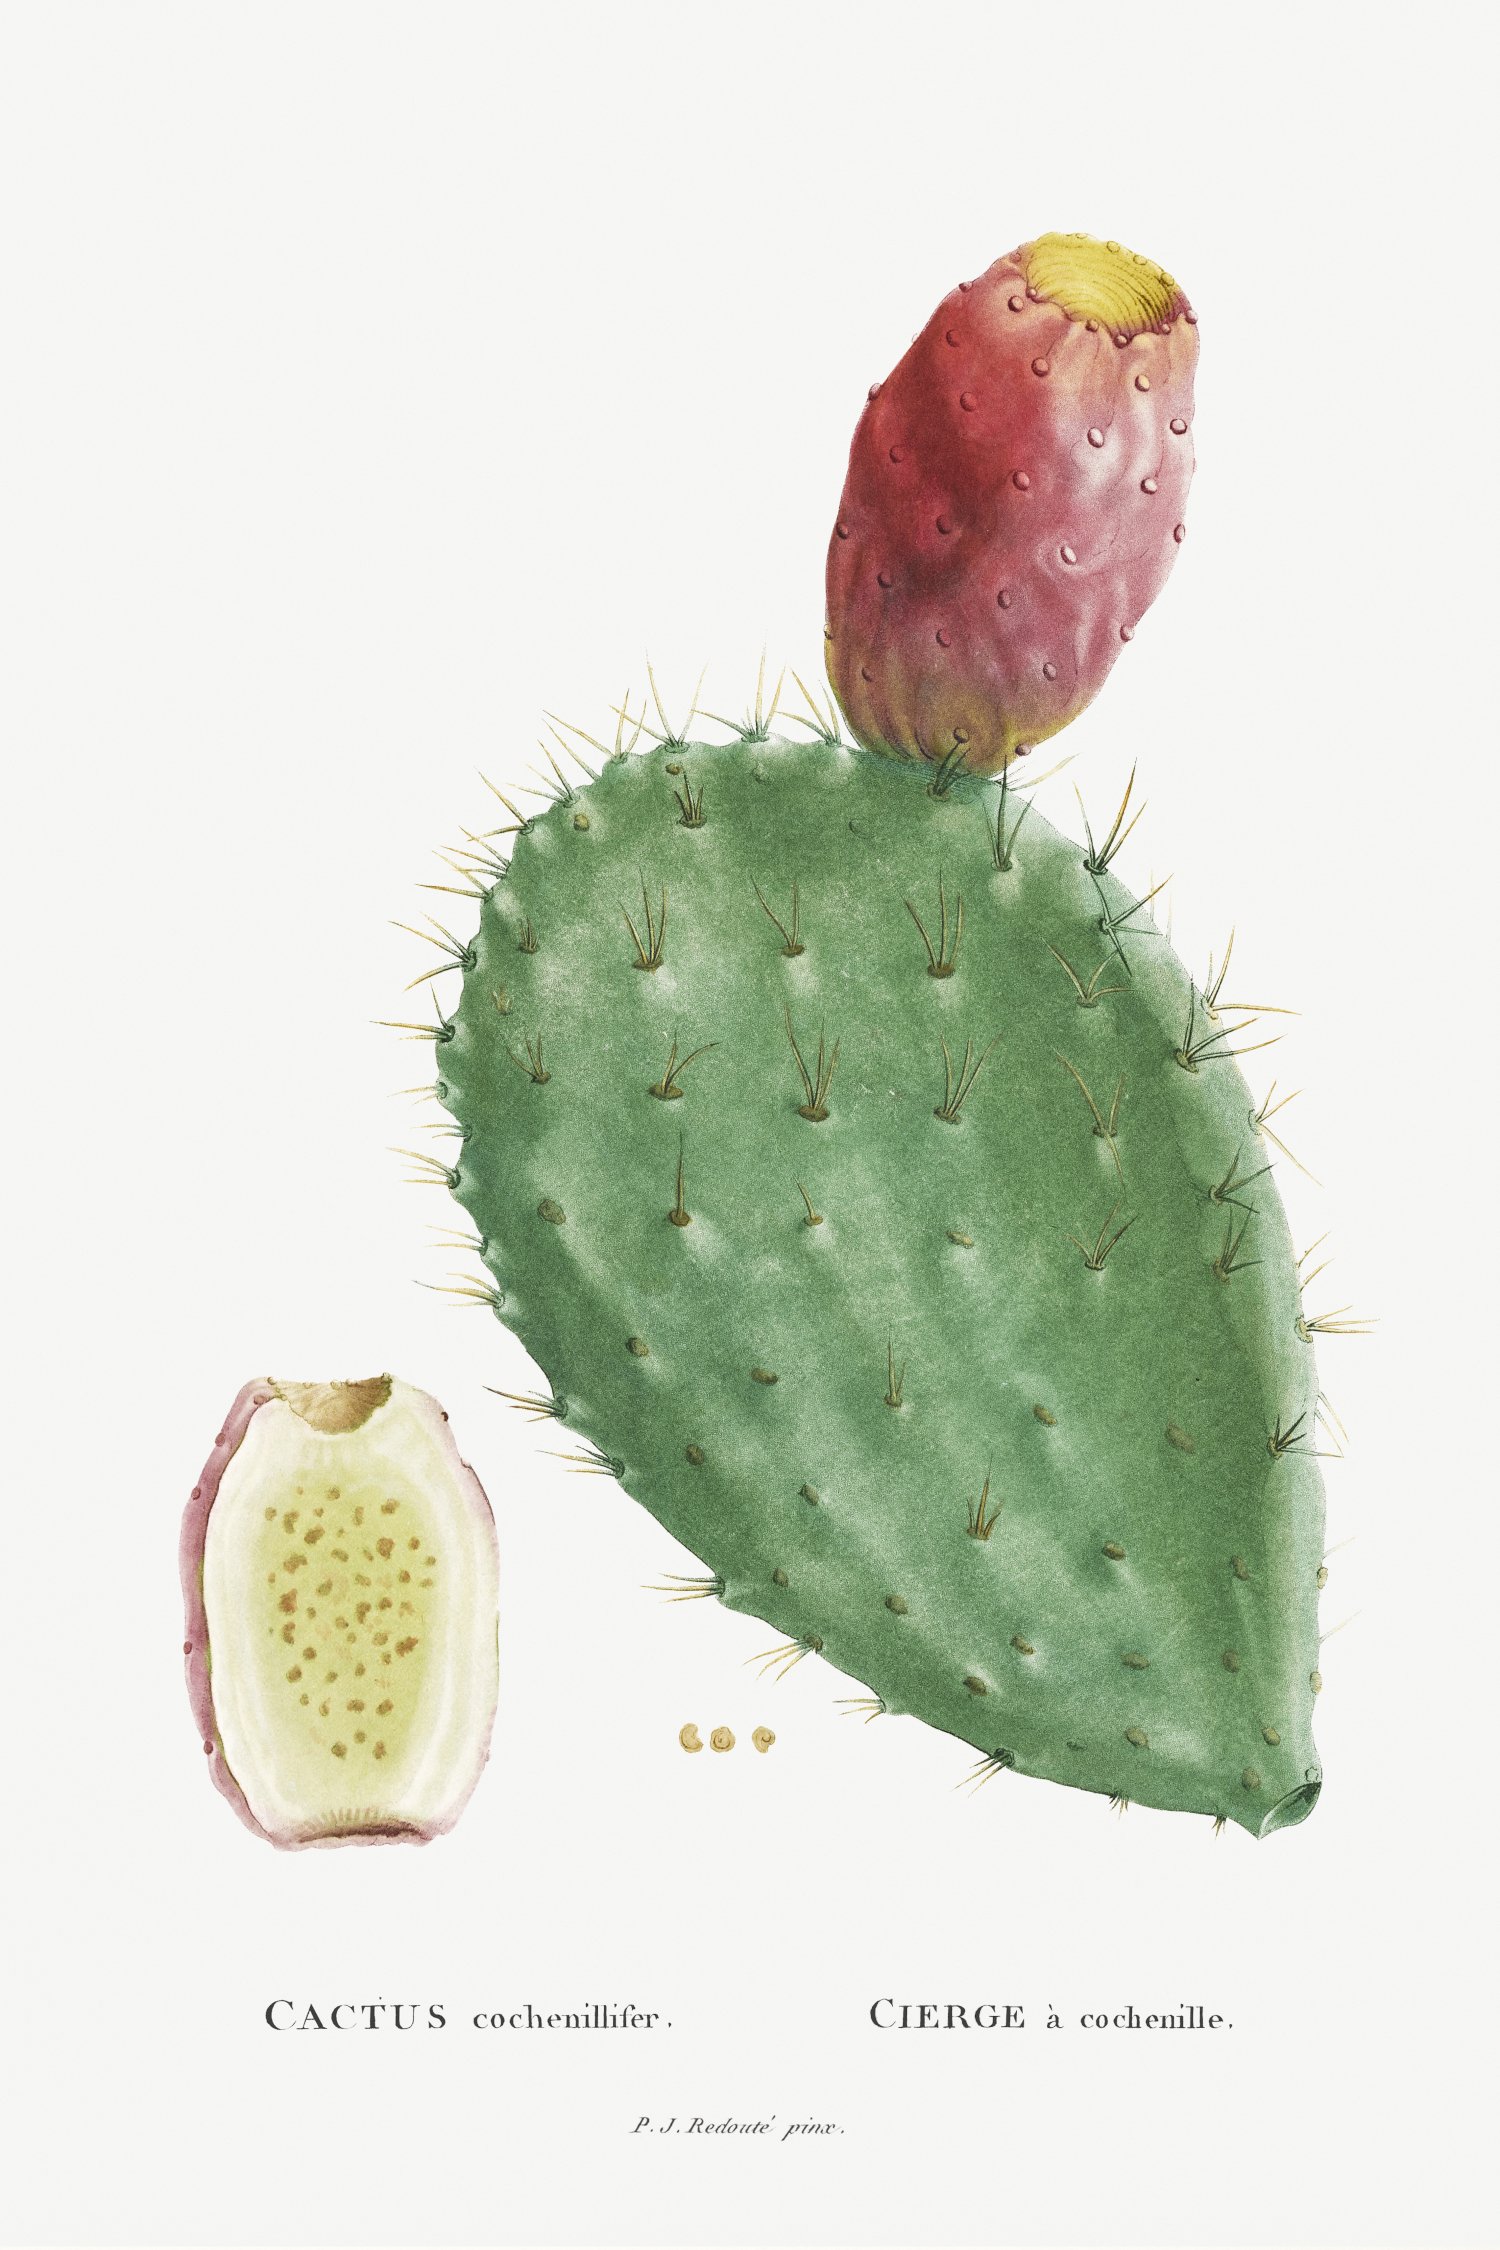 Cactus Cochenillifer Image from Histoire des Plantes Grasses (1799)

(Original from Biodiversity Heritage Library)